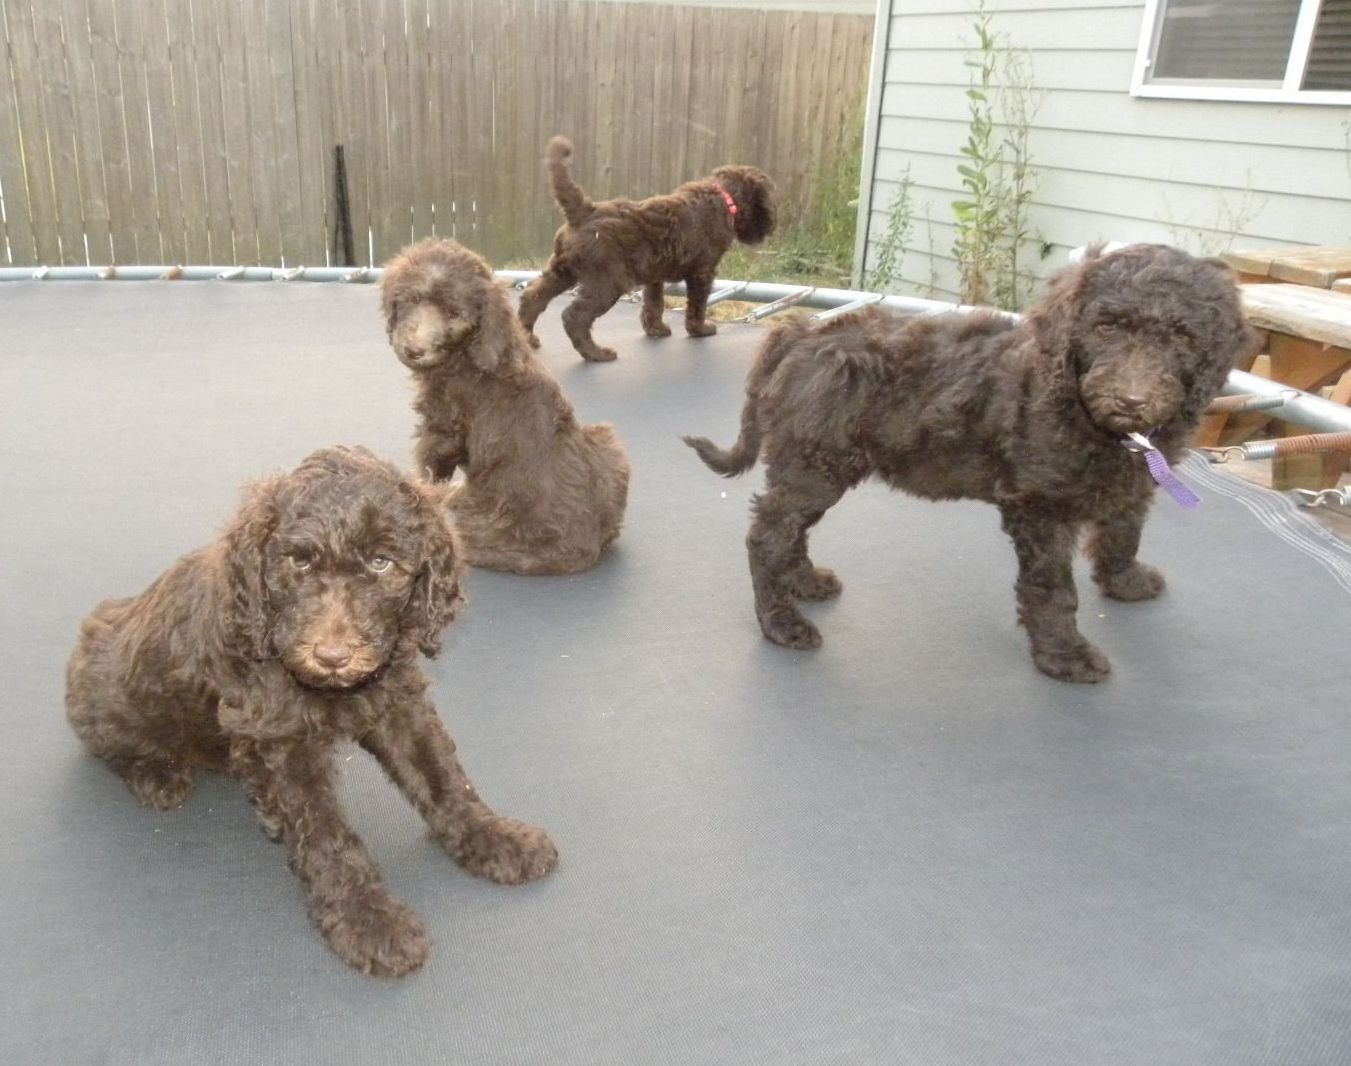 F1b Labradoodles Puppies - 7 weeks old - Early Socialization - littermates playing on the trampoline 